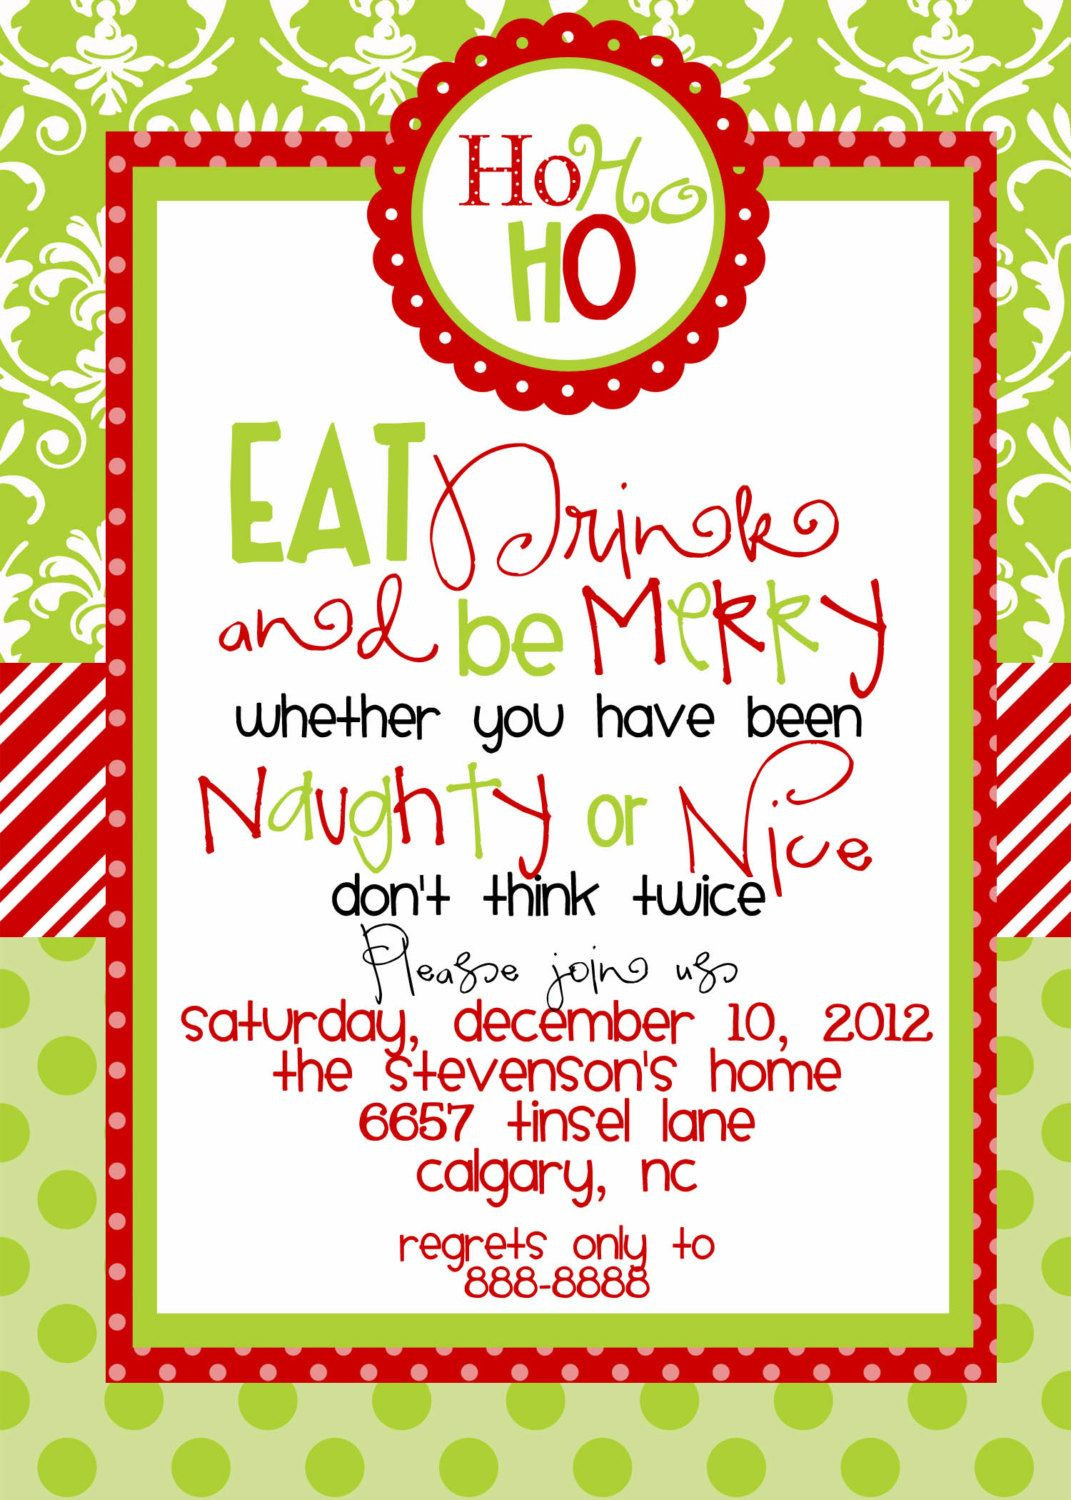 21 Ideas for Holiday Party Invitation Ideas - Home, Family, Style and